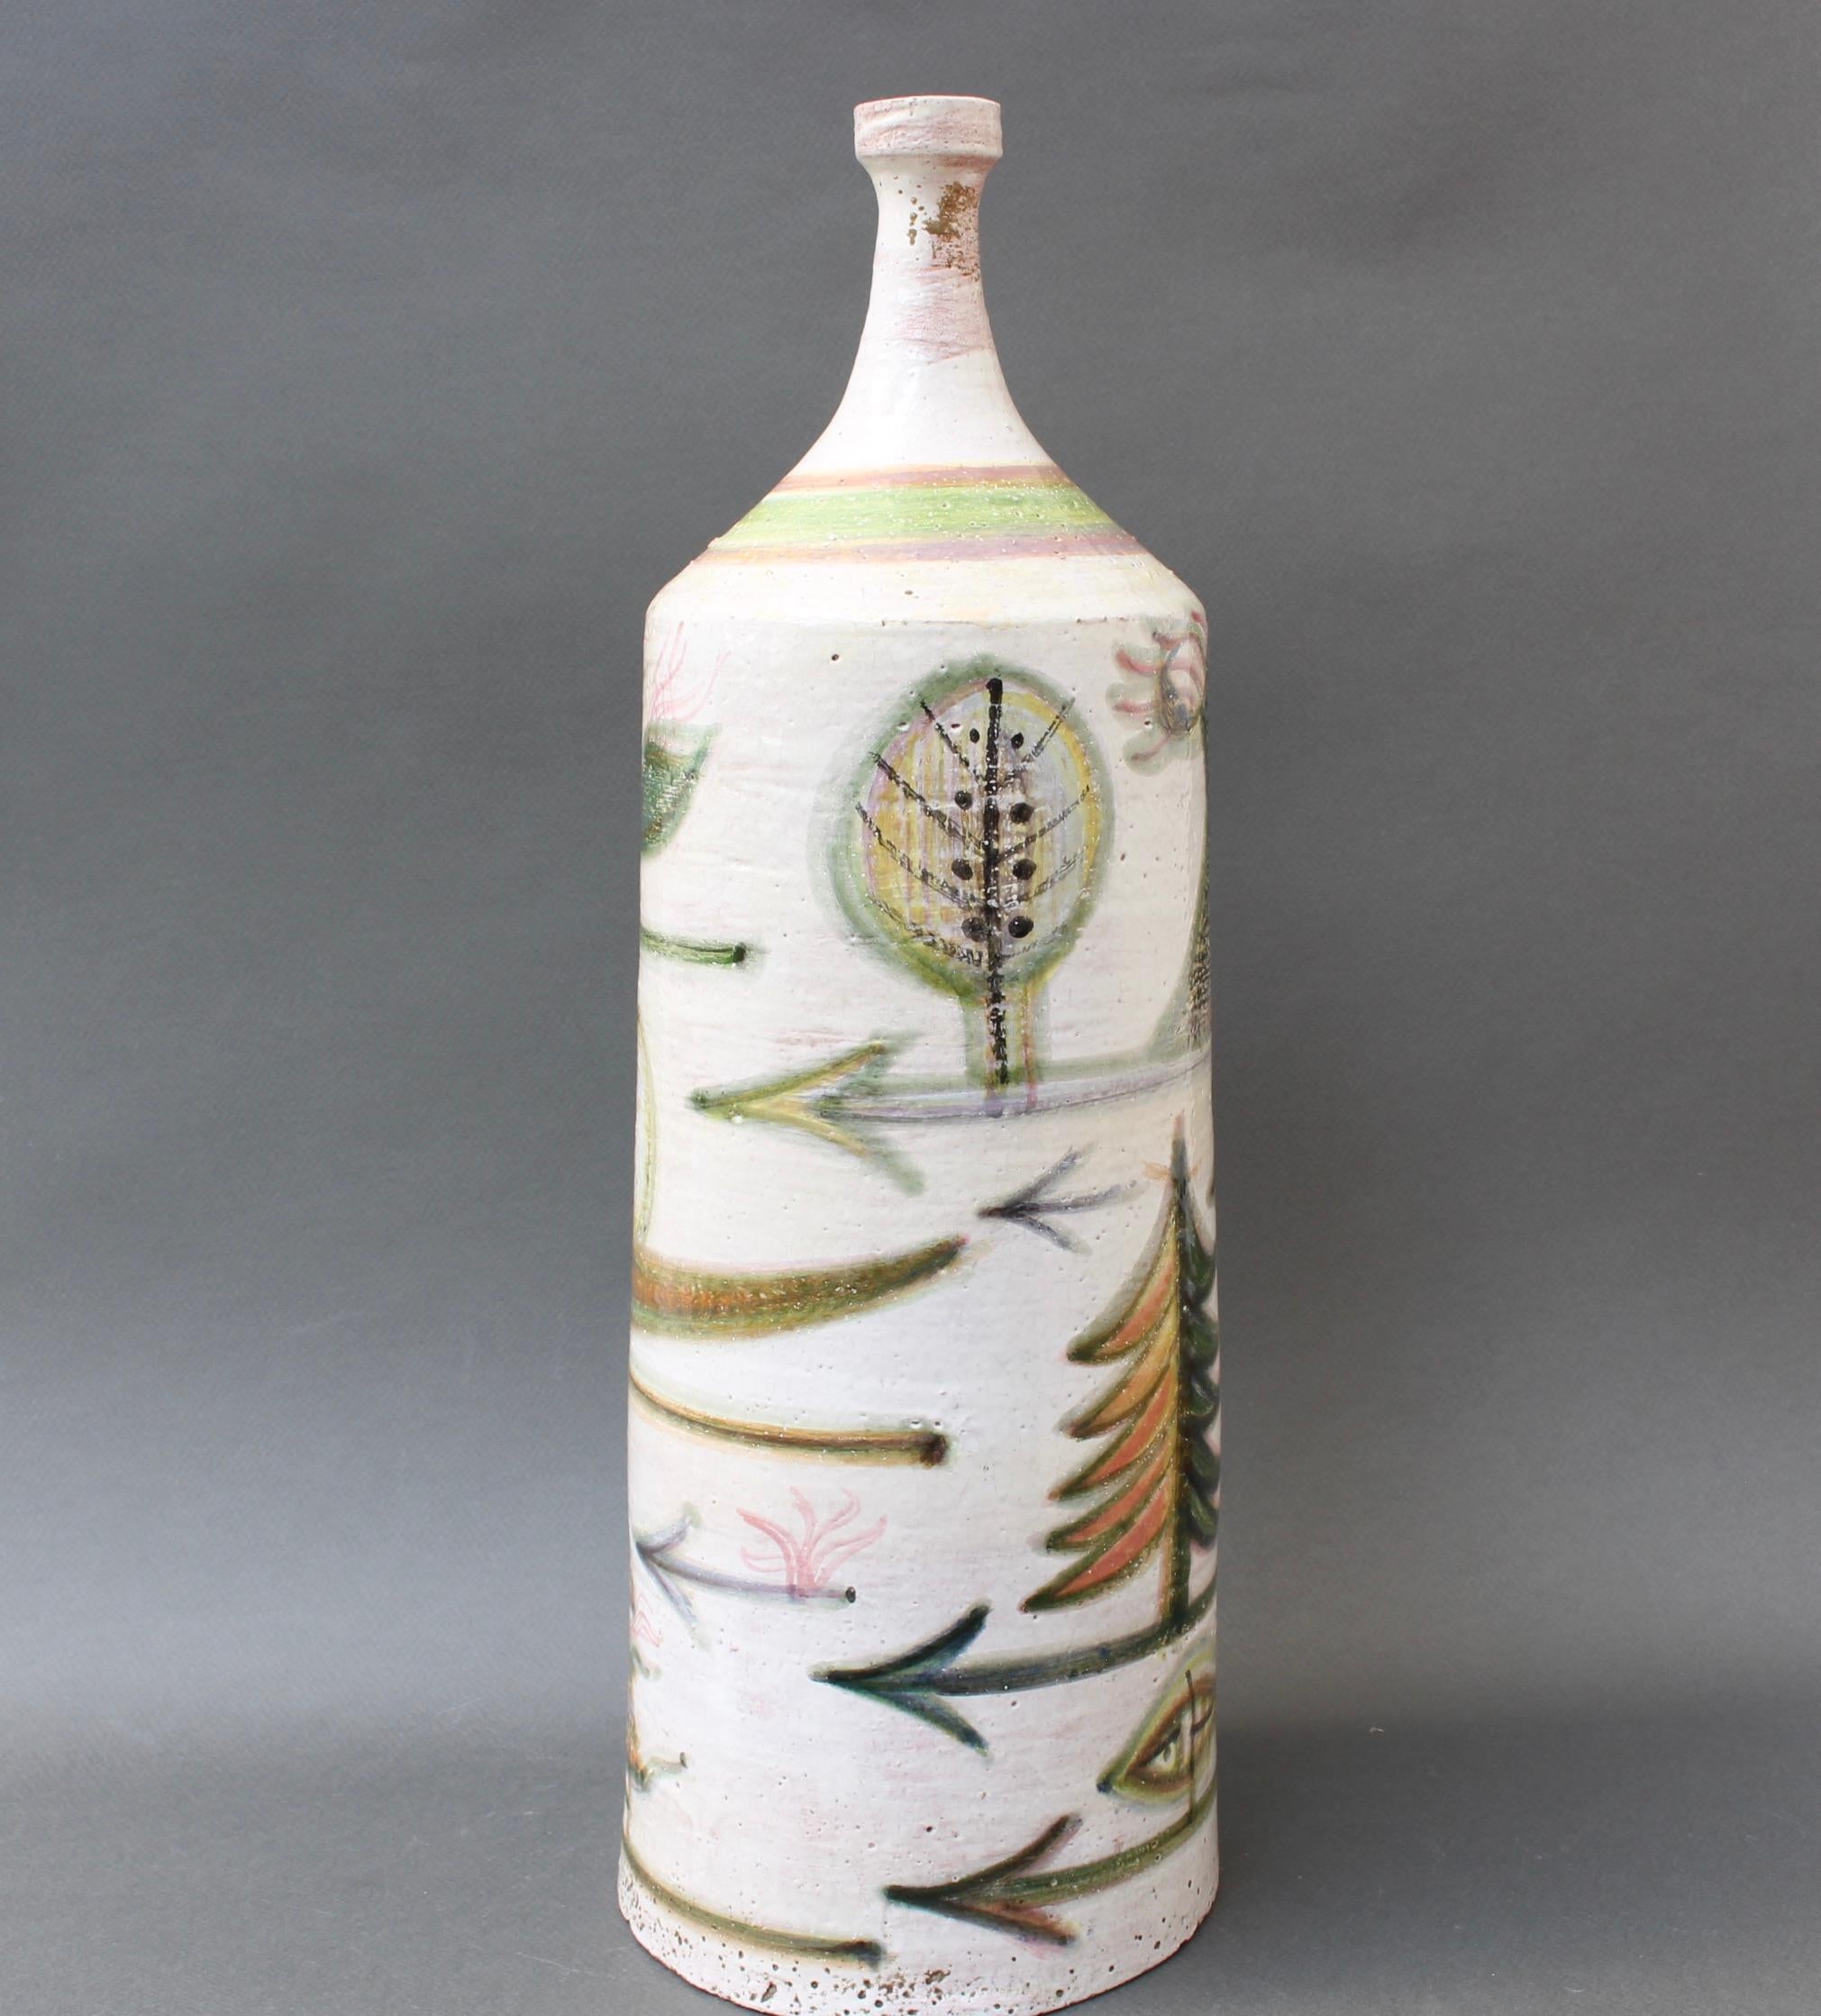 Hand-Painted Decorative French Ceramic Bottle-Shaped Vase by David Sol, circa 1950s